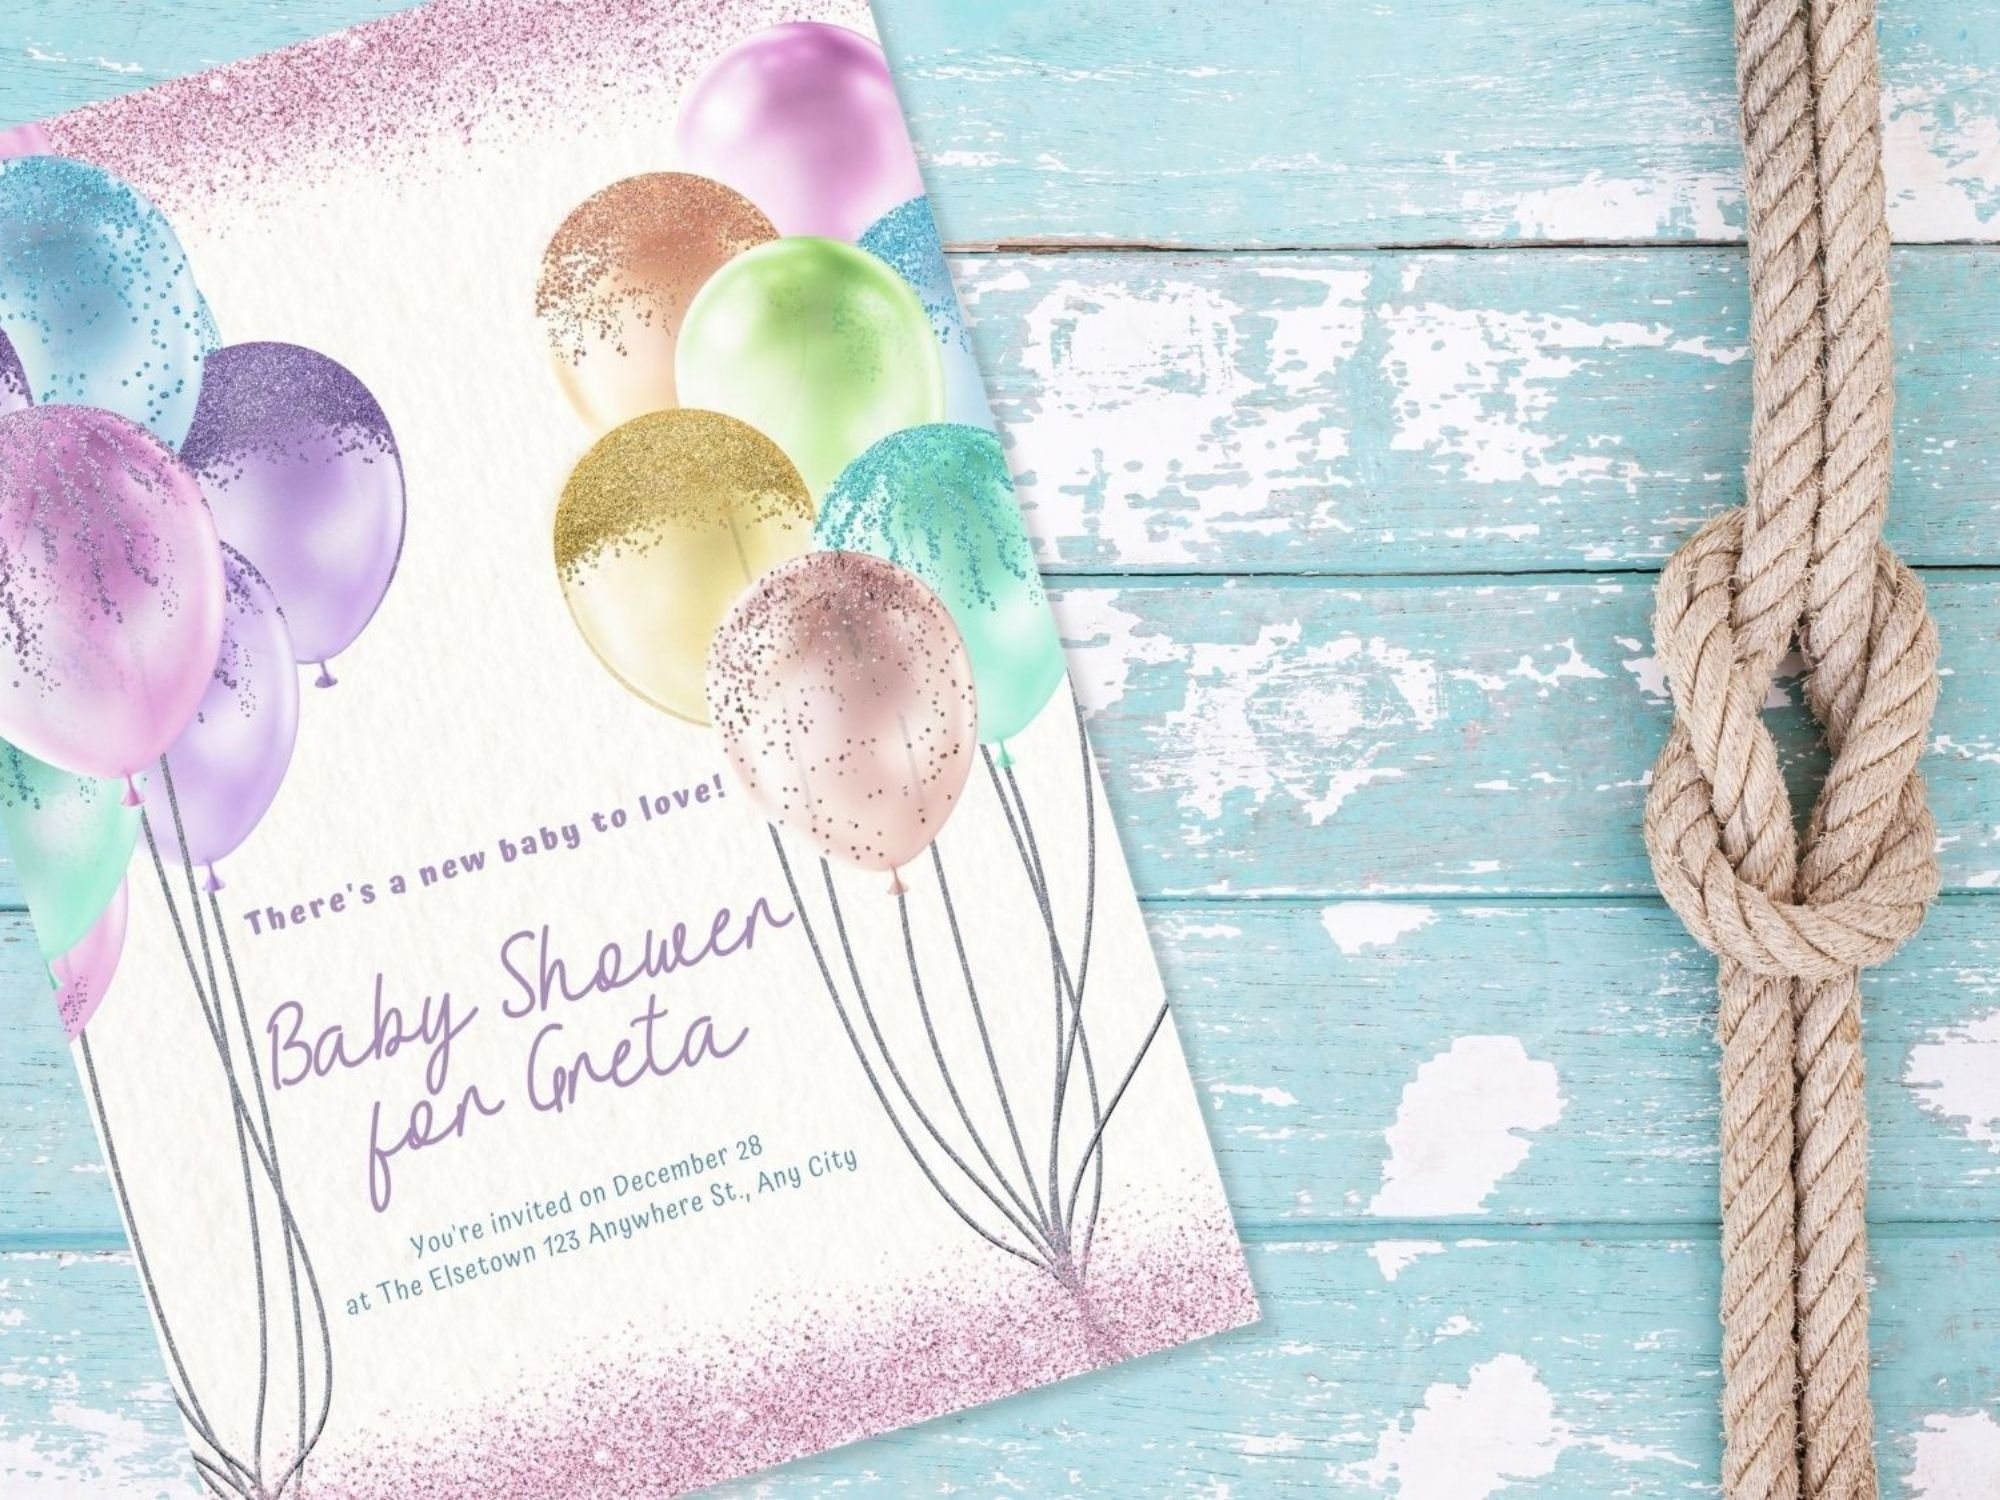 Greeting postcard with multicolor balloons.